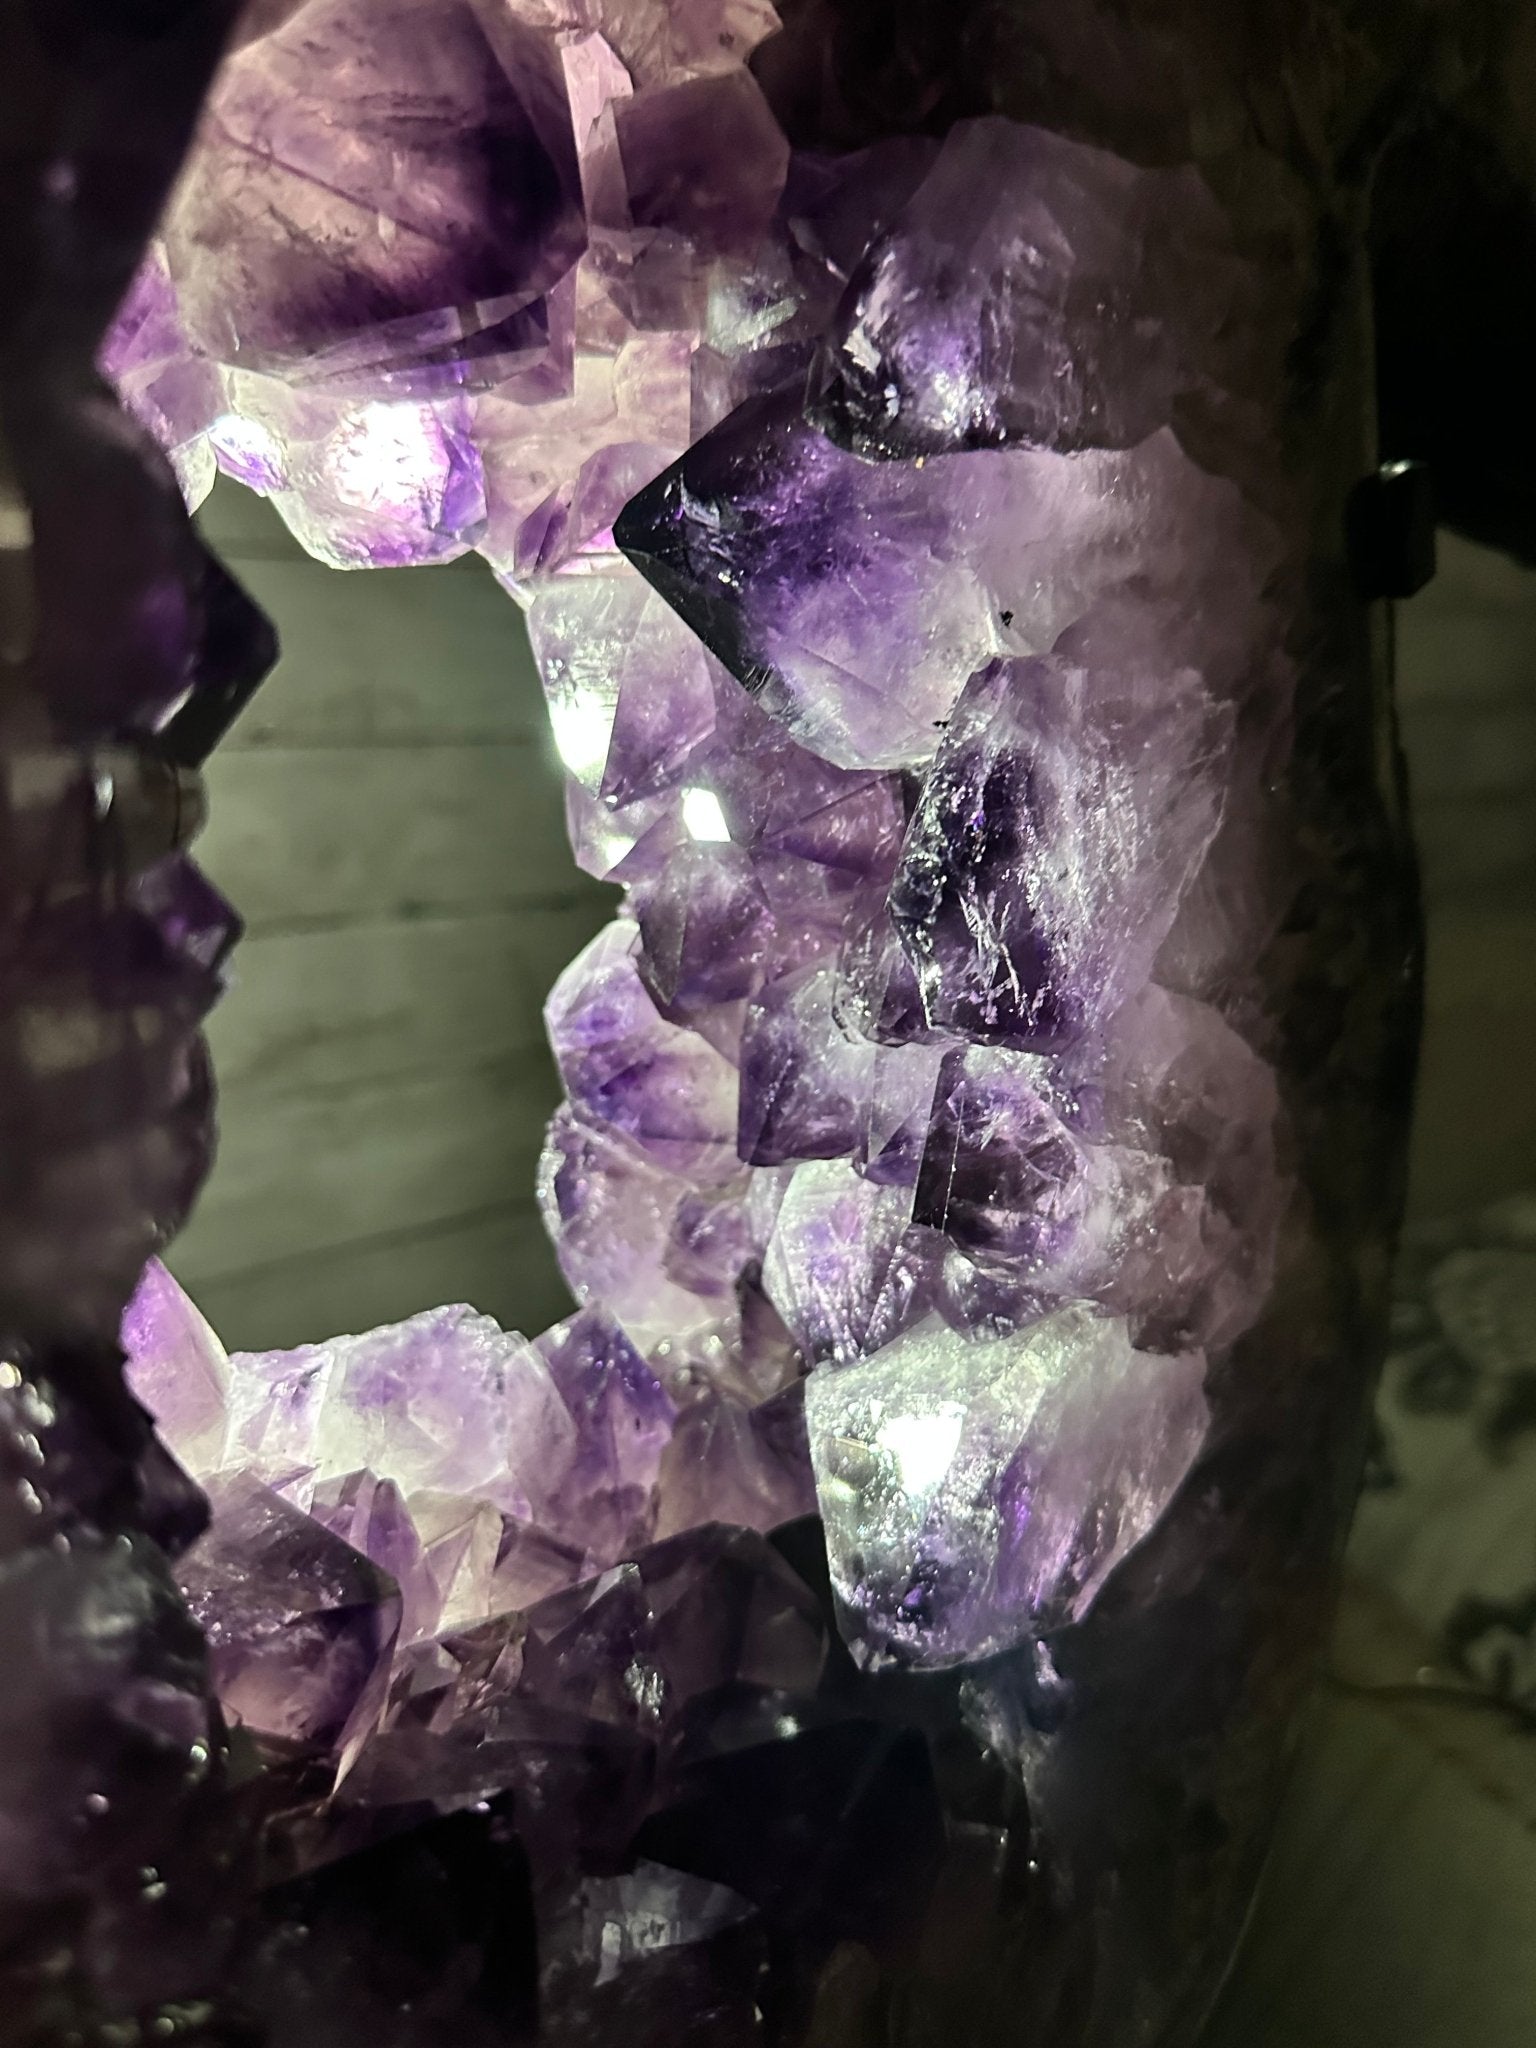 Super Quality Amethyst Portal, Rotating Stand, 171 lbs & 73" Tall #5604-0133 - Brazil GemsBrazil GemsSuper Quality Amethyst Portal, Rotating Stand, 171 lbs & 73" Tall #5604-0133Portals on Rotating Bases5604-0133